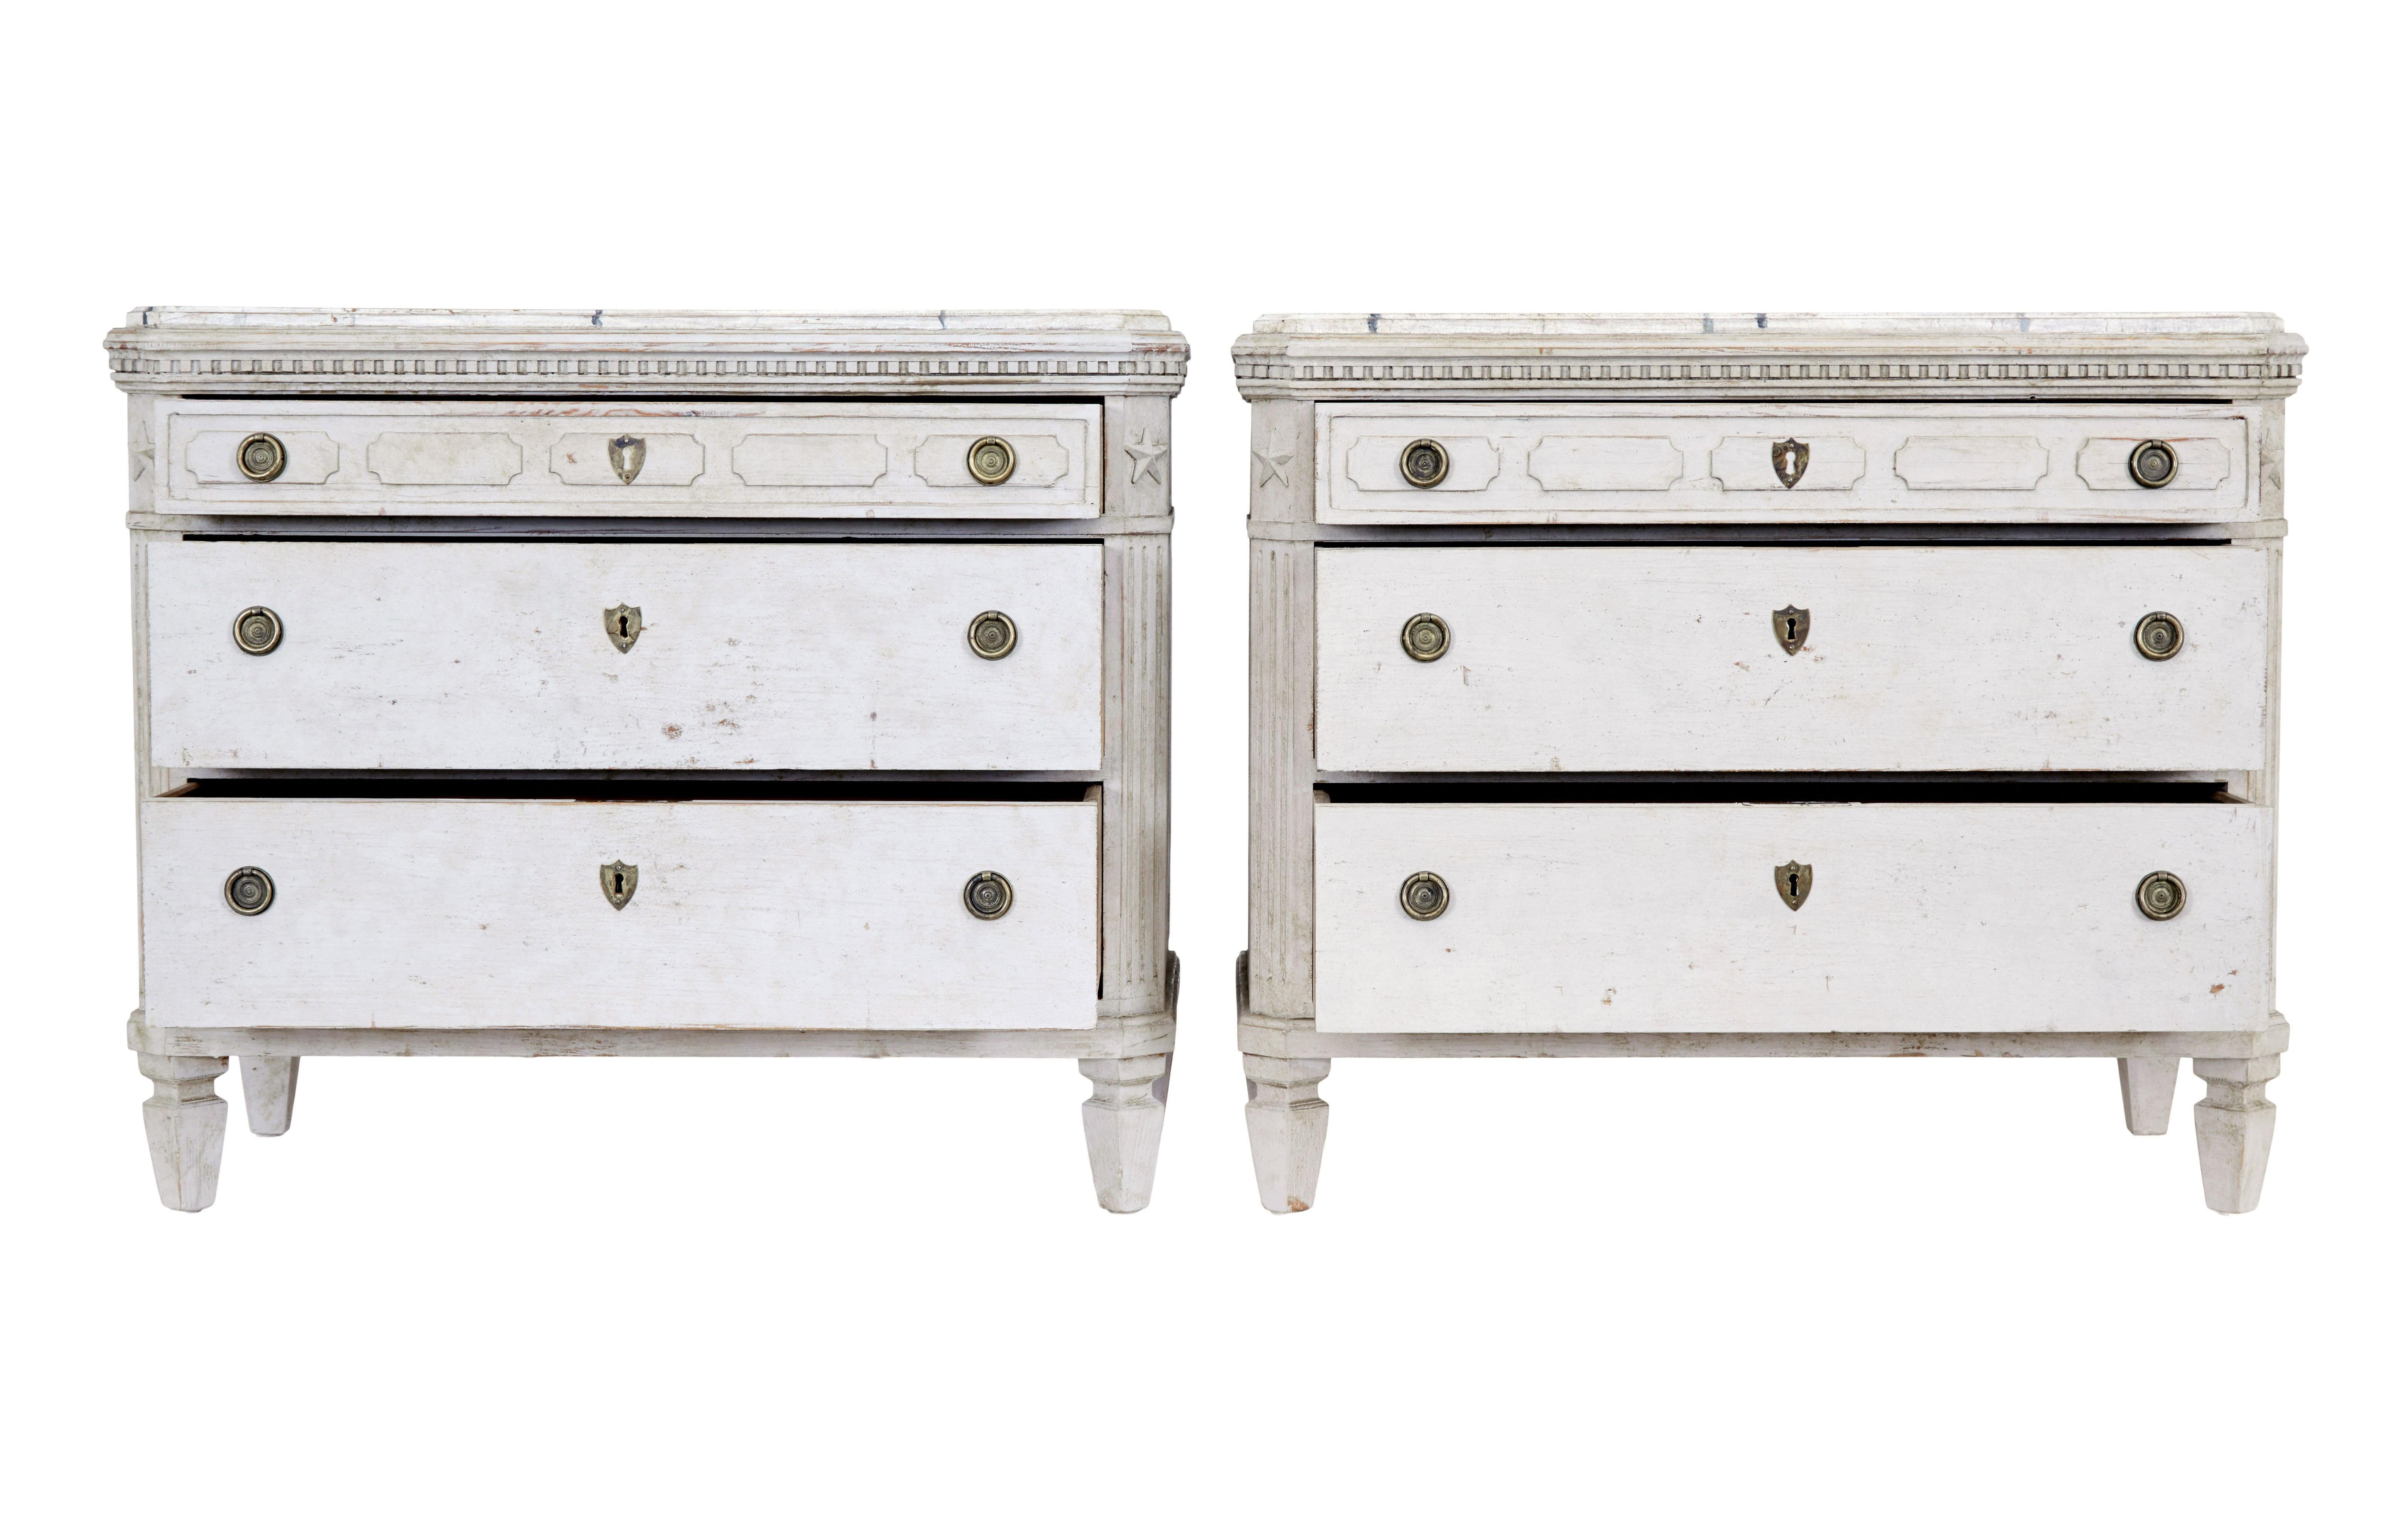 Pair of 19th century swedish painted faux marble top chest of drawers circa 1870.

Hand painted top surface to simulate marble, stepped edge with dentil frieze detailing.  Canted corners with applied star and fluted detailing.  Short top drawer with